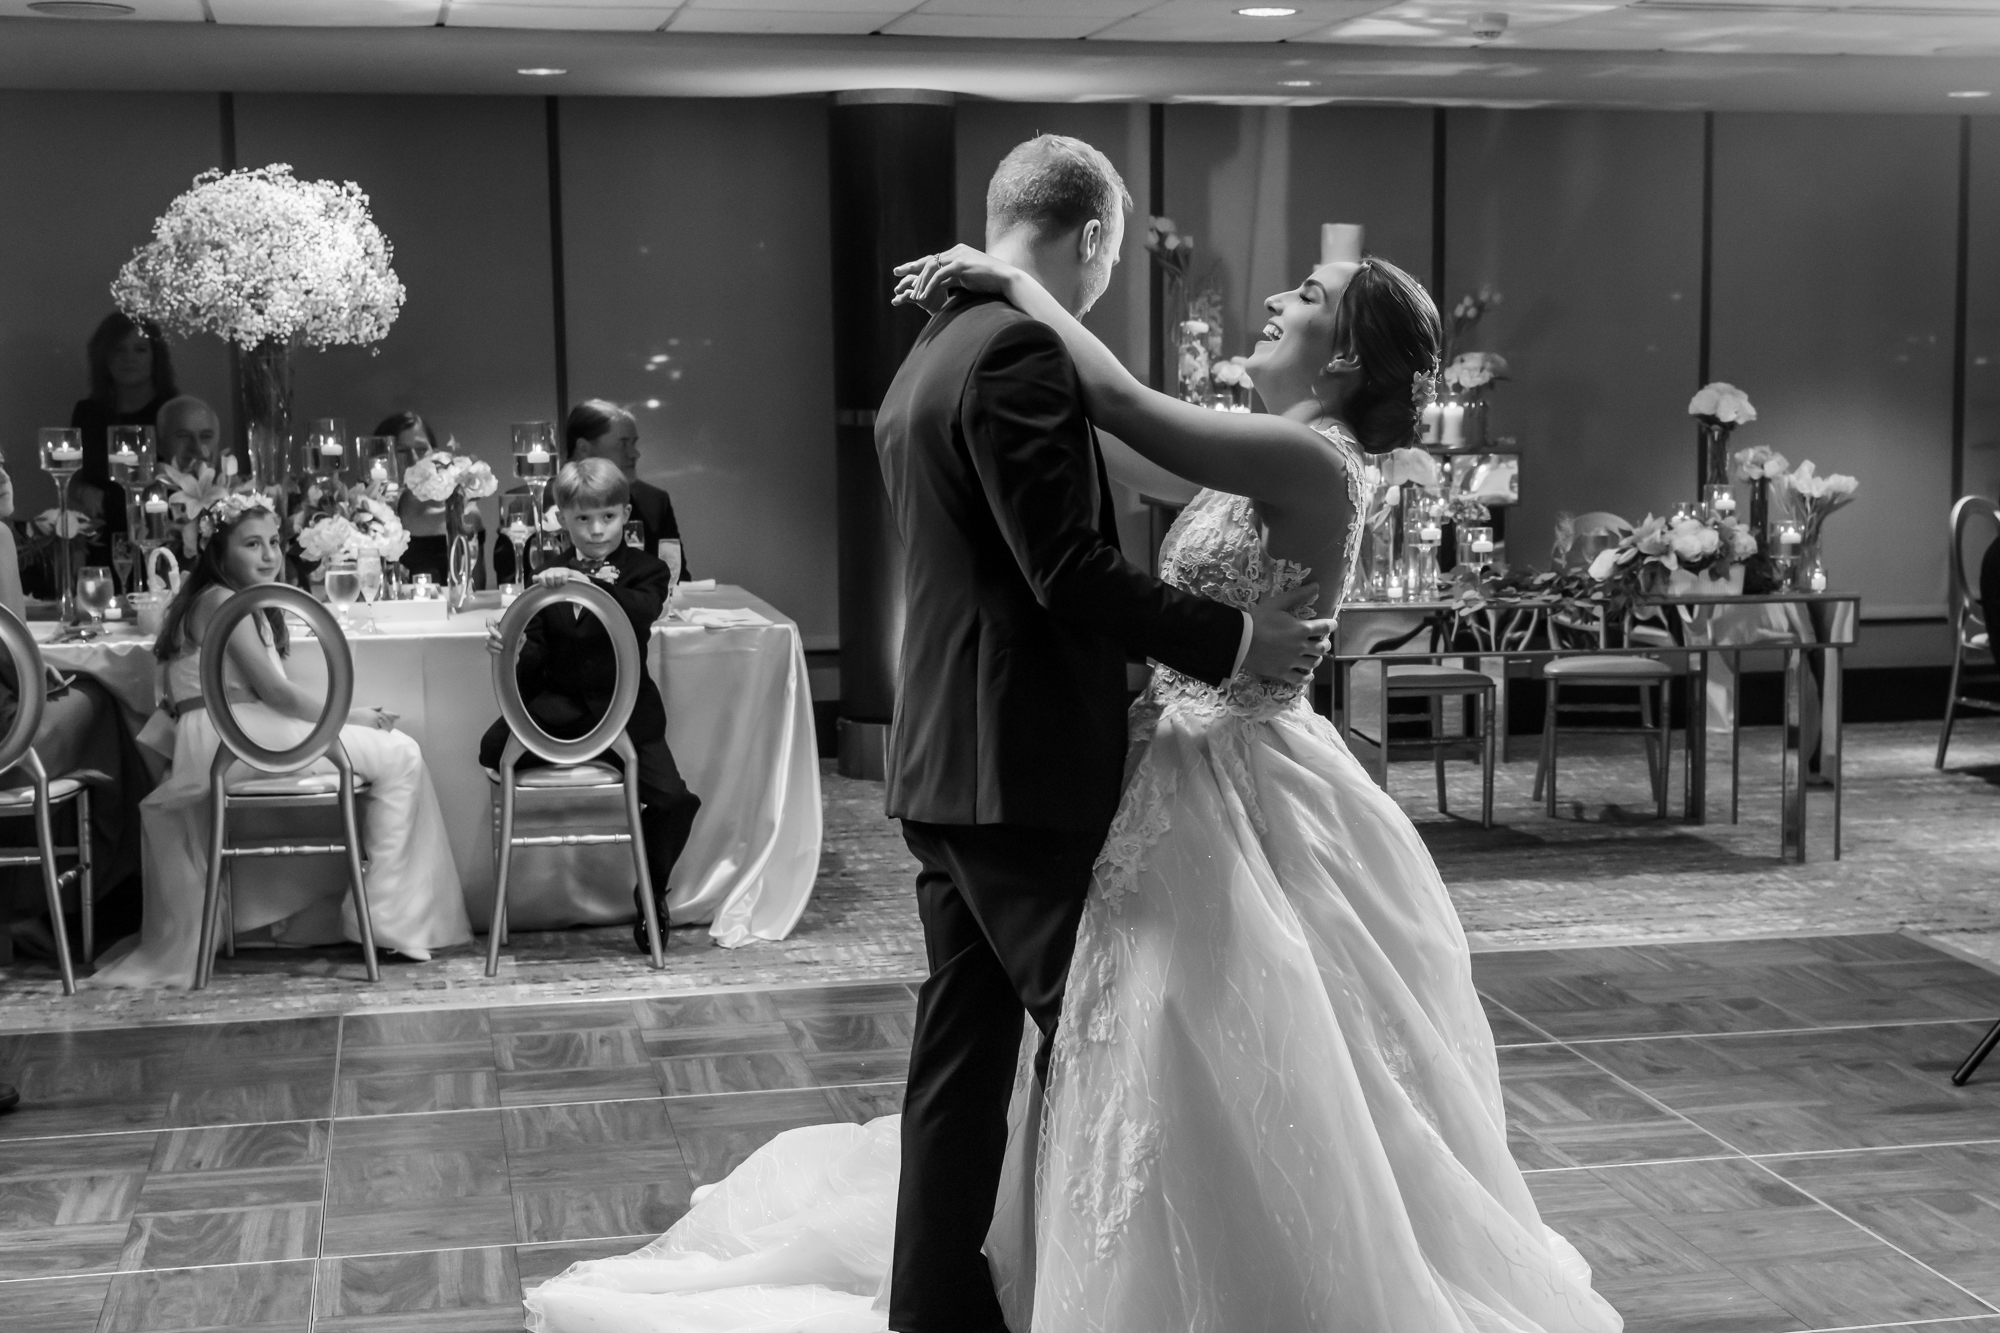 Black and white photo of newlyweds first dance